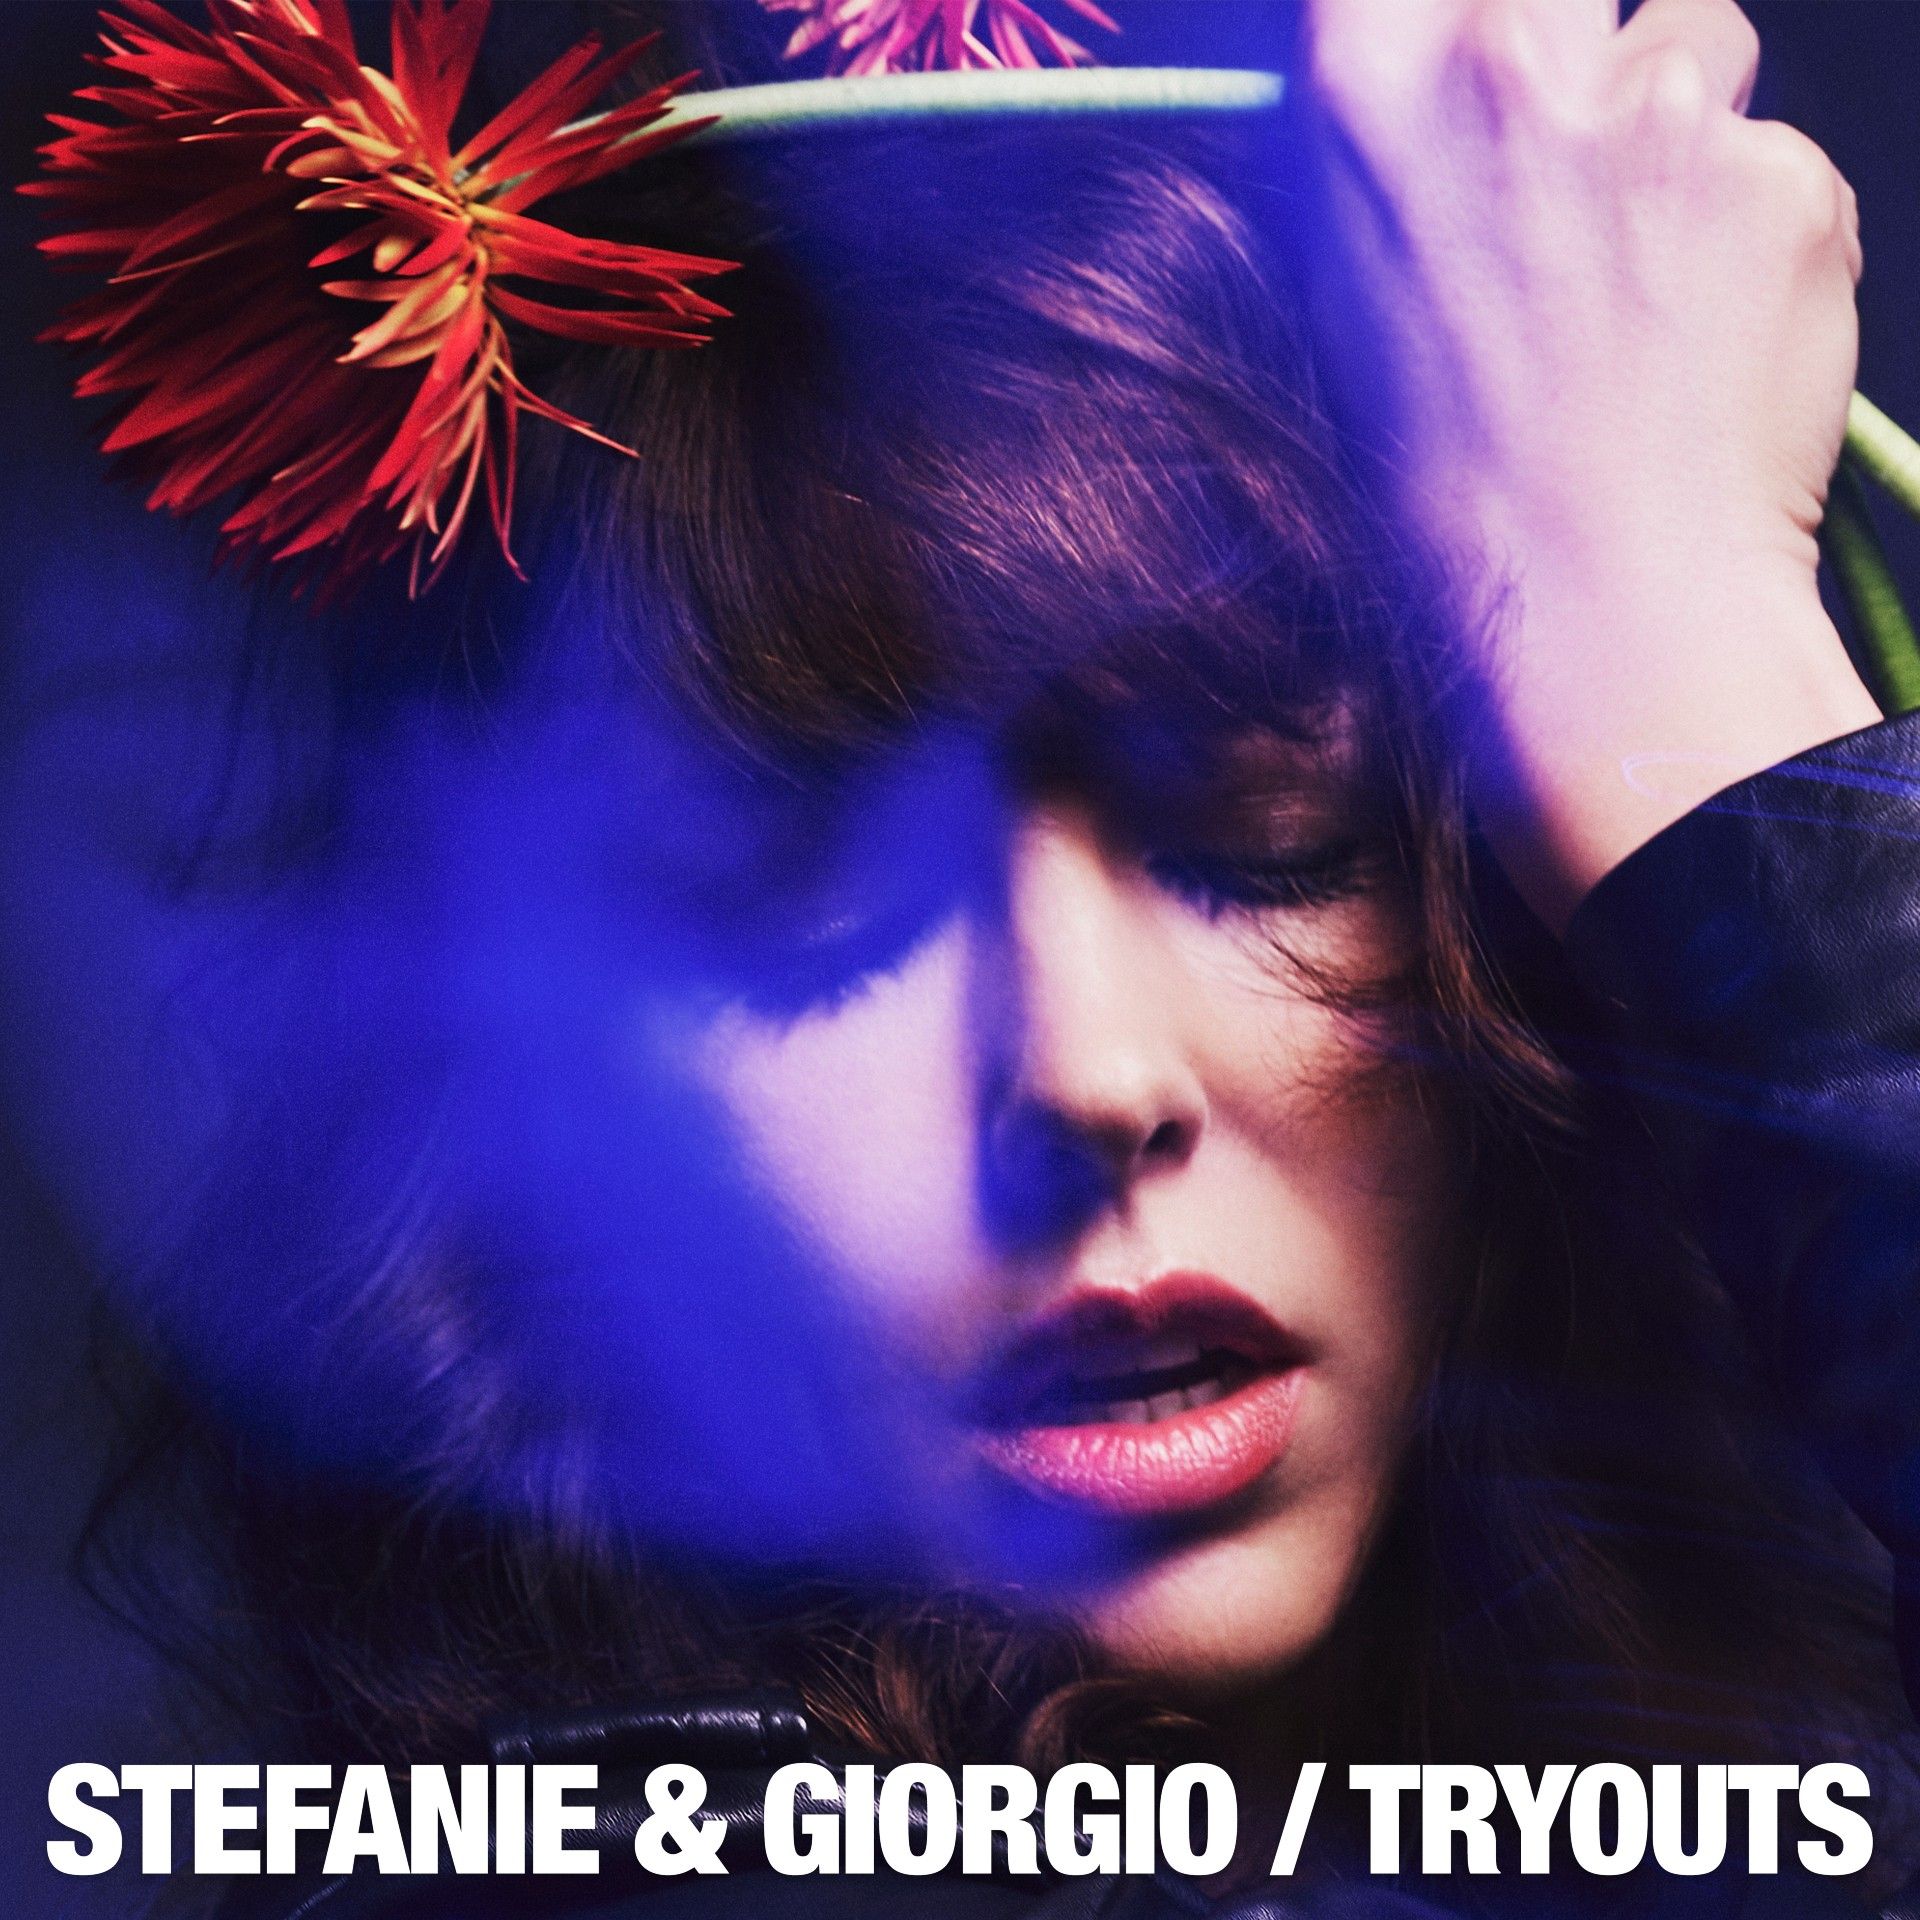 Tryouts single cover showing Stefanie Joosten holding a flower and 